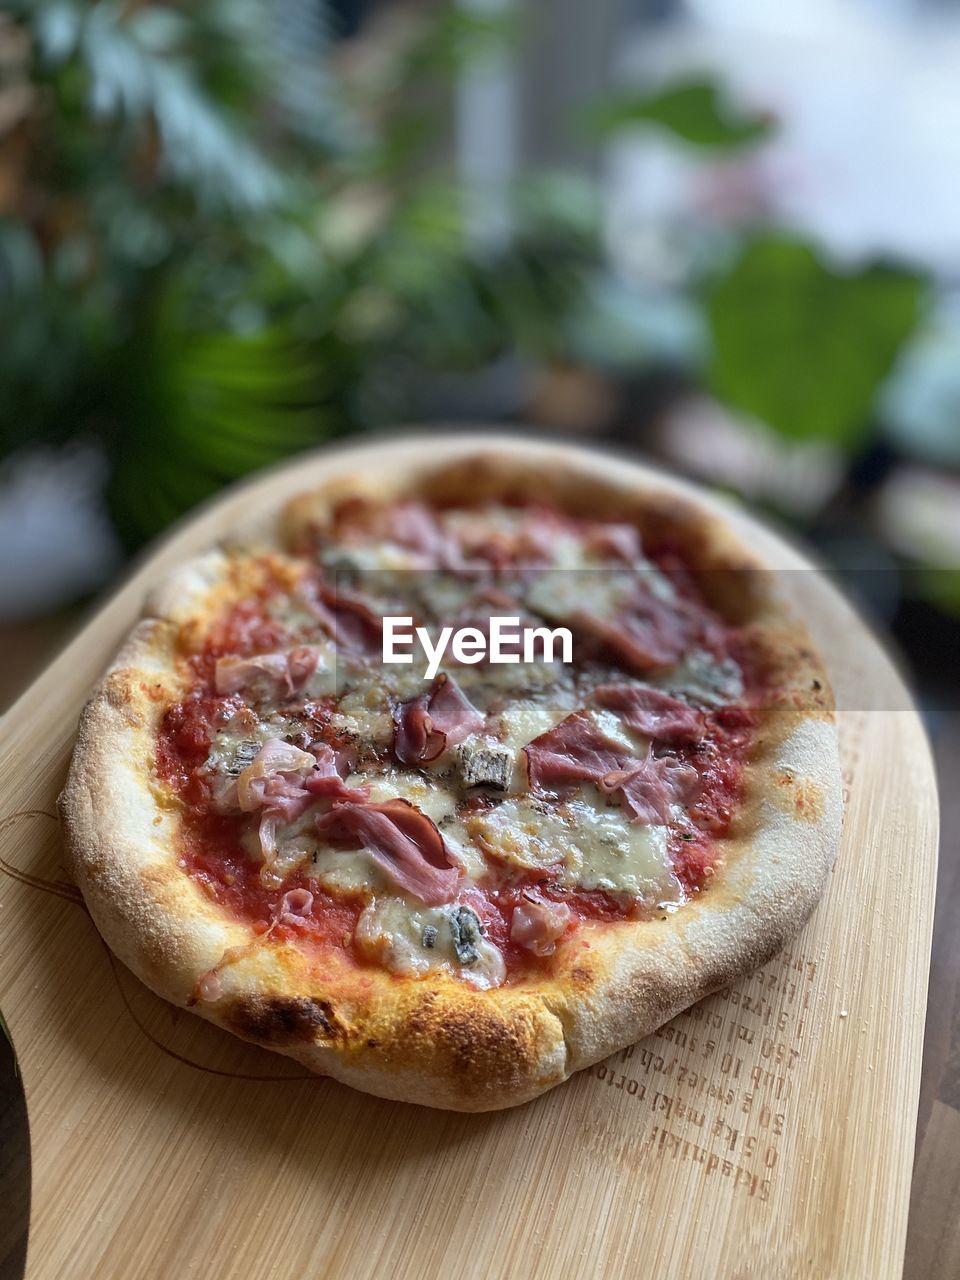 food and drink, food, dish, fast food, pizza, freshness, cuisine, wood, fruit, healthy eating, vegetable, no people, produce, italian food, dairy, plant, baked, cheese, dessert, table, herb, meal, cutting board, close-up, focus on foreground, slice, quiche, indoors